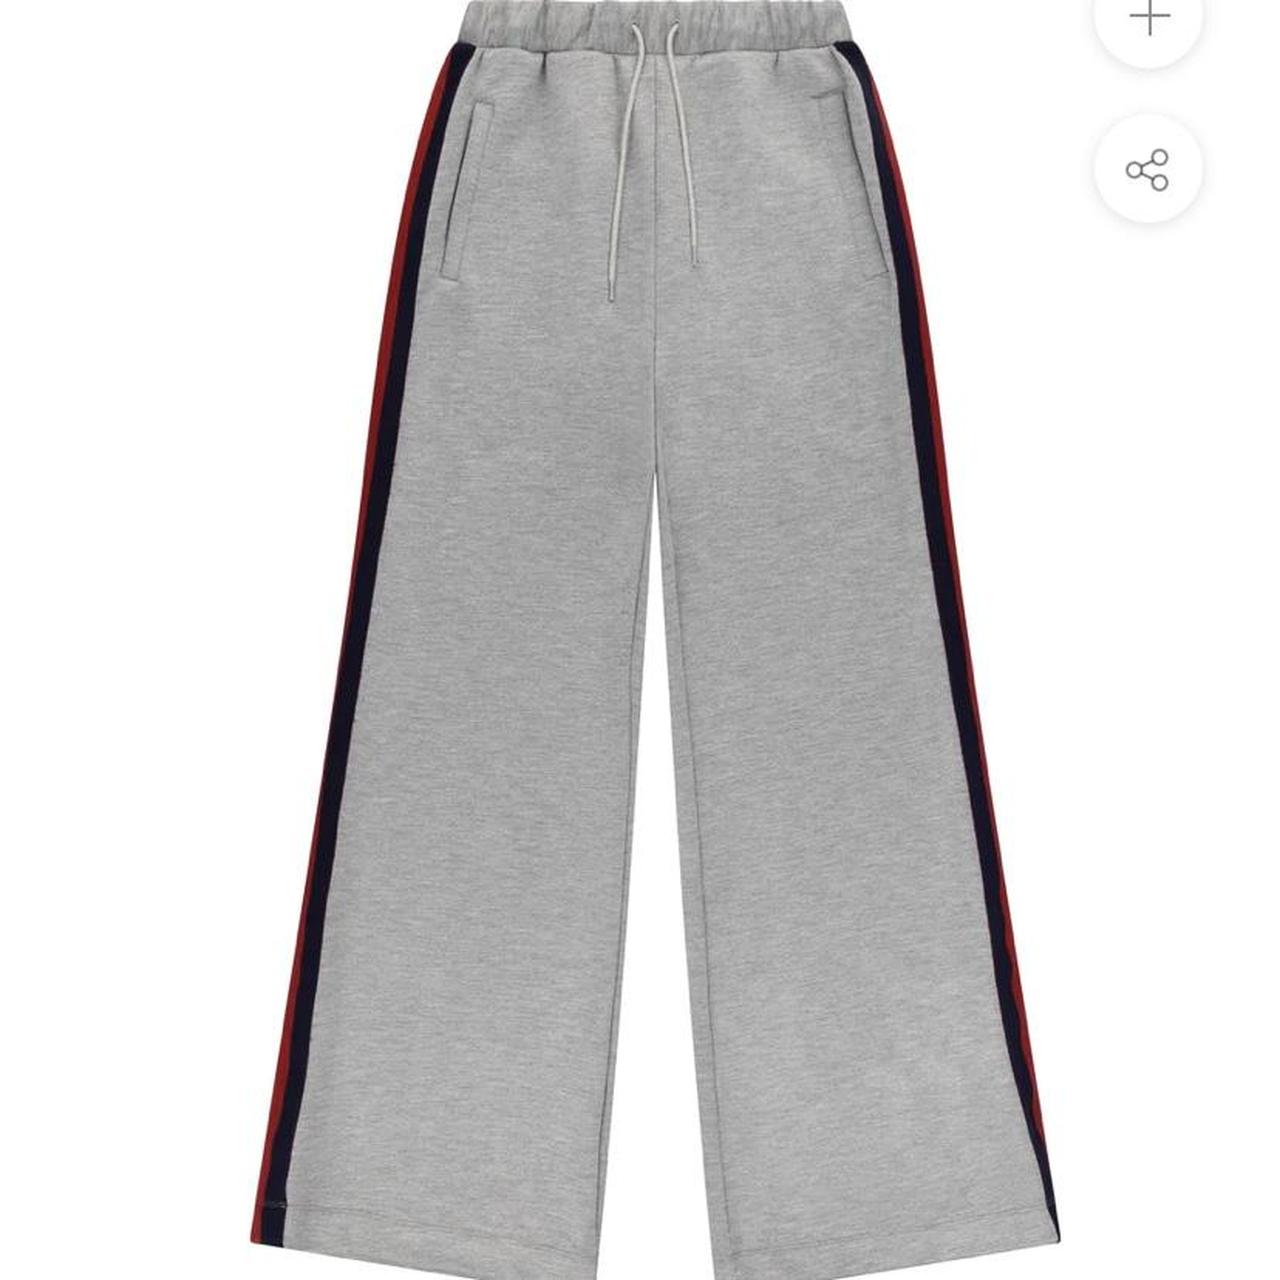 Être Cécile Women's Grey and Red Joggers-tracksuits (2)